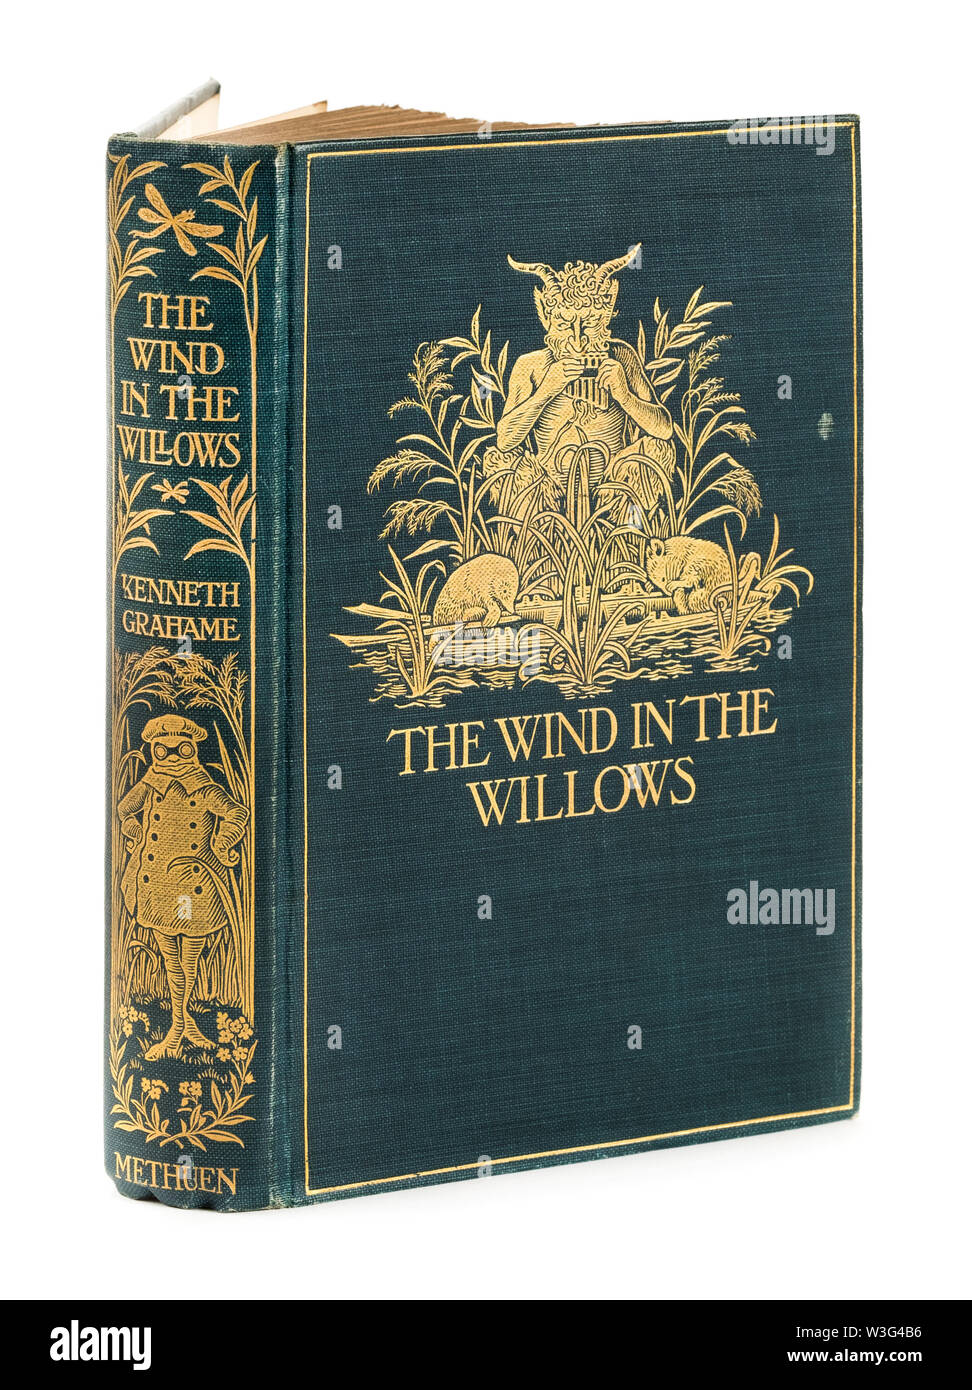 The Wind in the Willows by Kenneth Grahame (2nd edition, 1908, Methuen & Co) Stock Photo